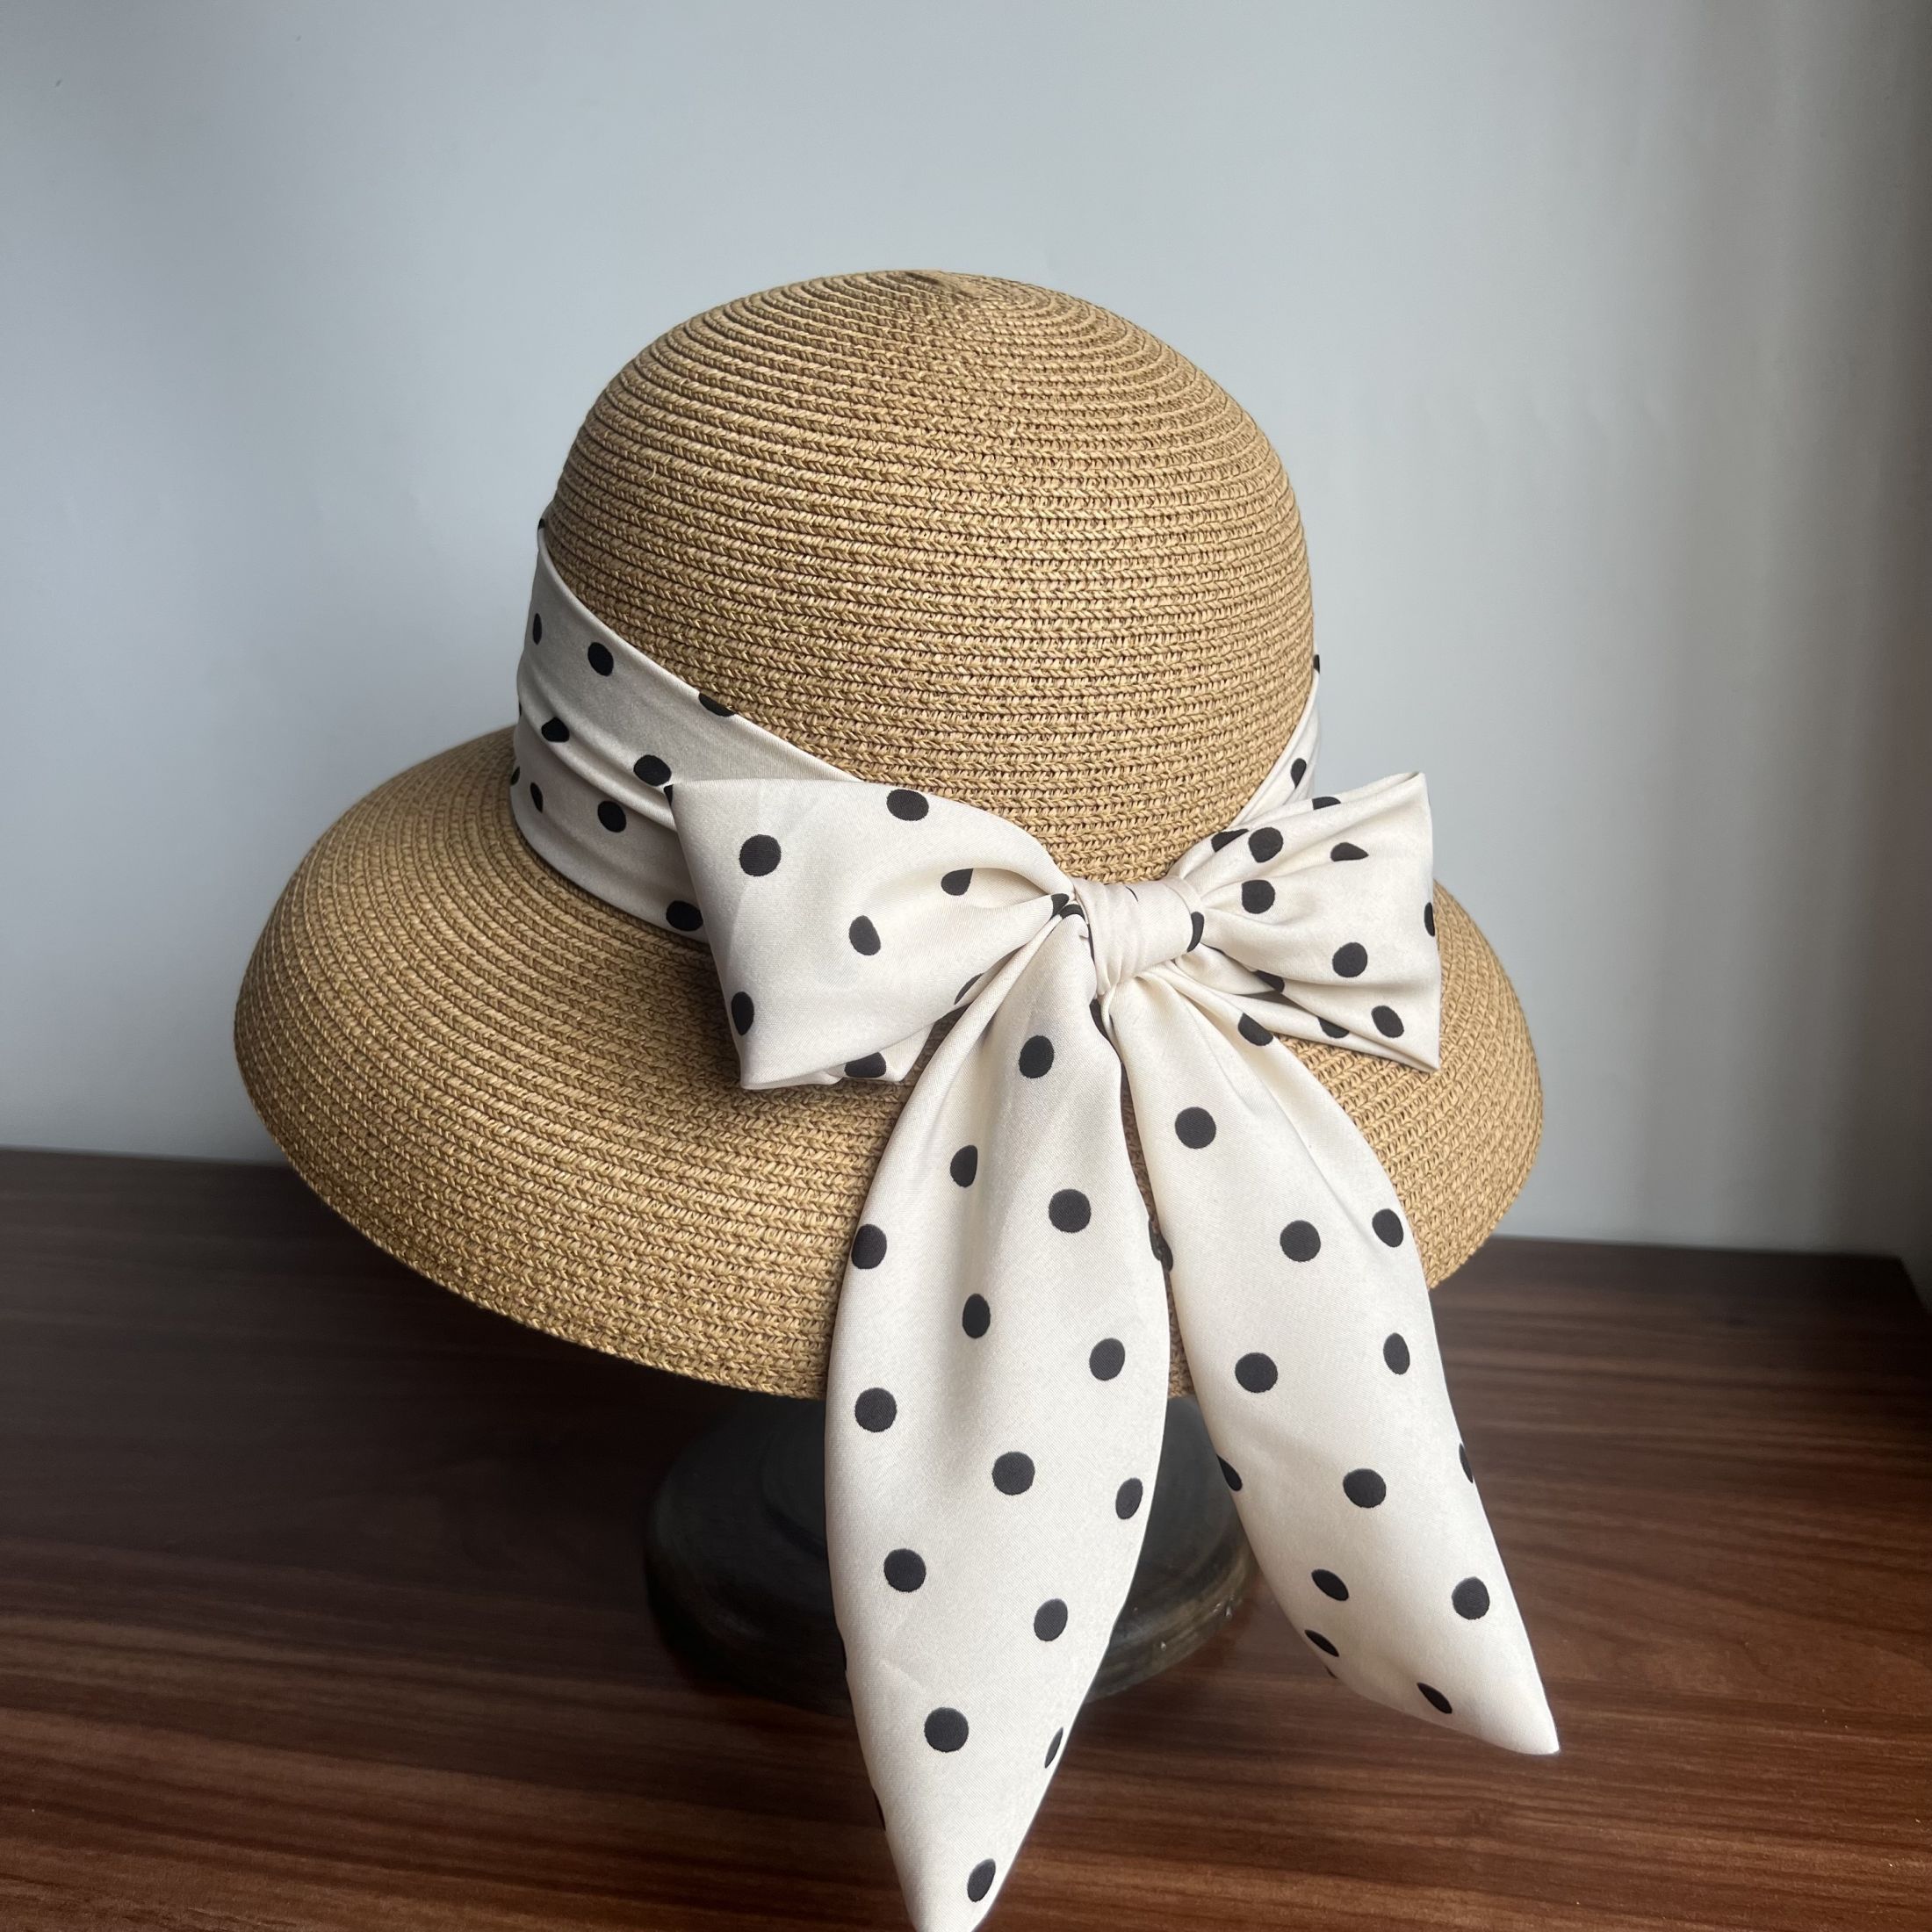 Wide Brim Sun Protection Polka Dot Tie Bow Decor Straw Bucket Hat, Face Covering Breathable Versatile Sun Hat, Fishing Hat for Seaside Beach Travel